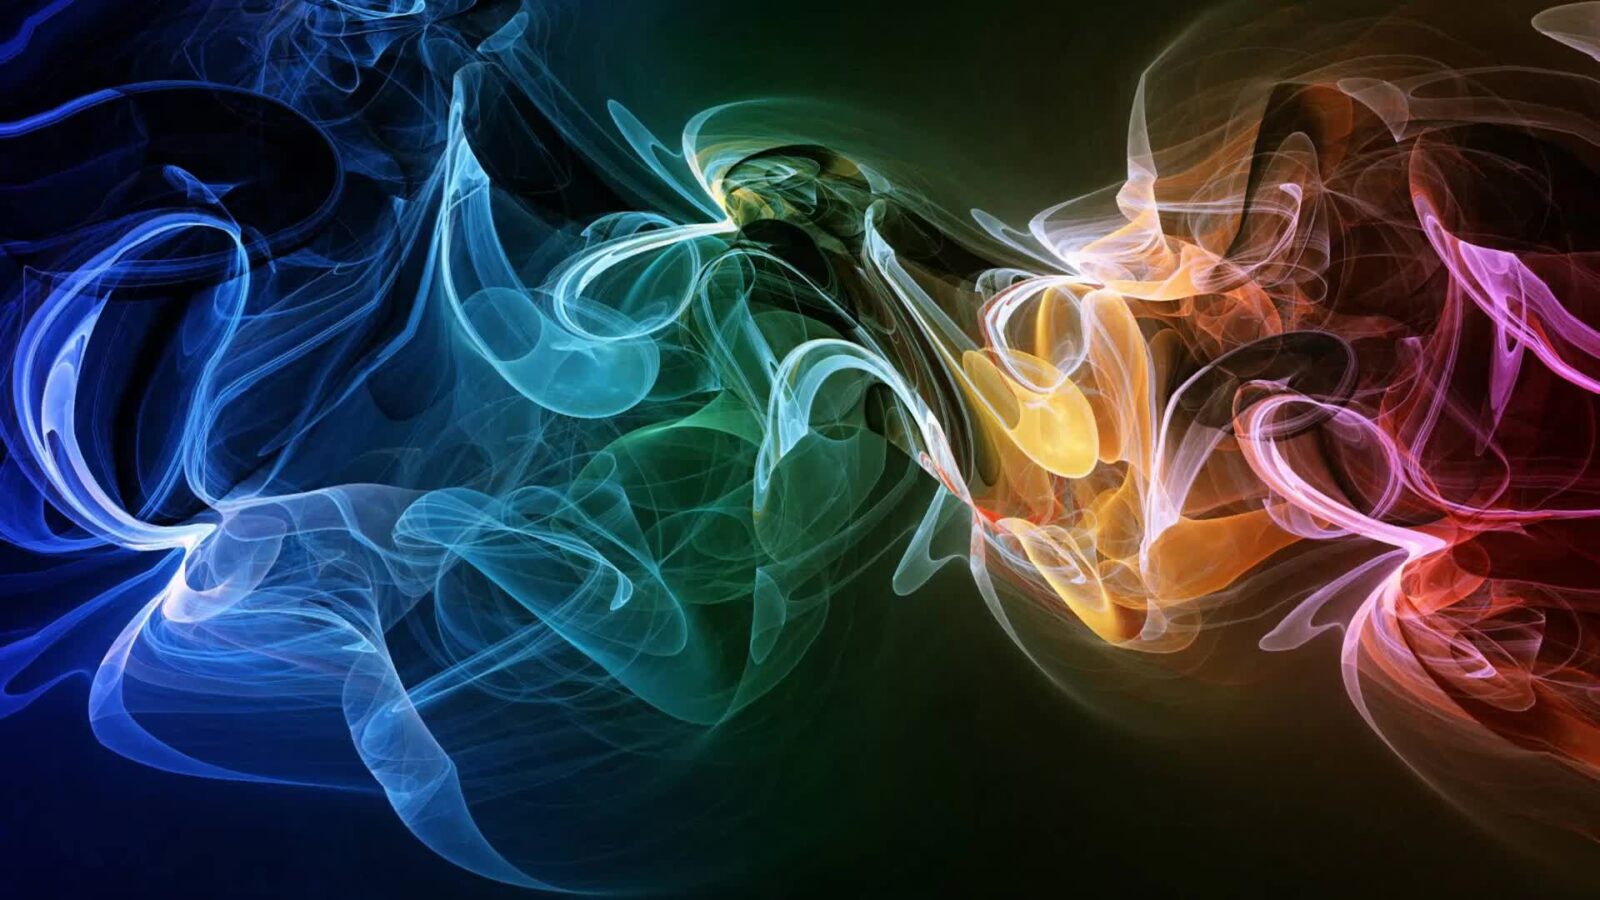 Cool Abstract Colorful Smoke - Amazing Live Wallpaper ...